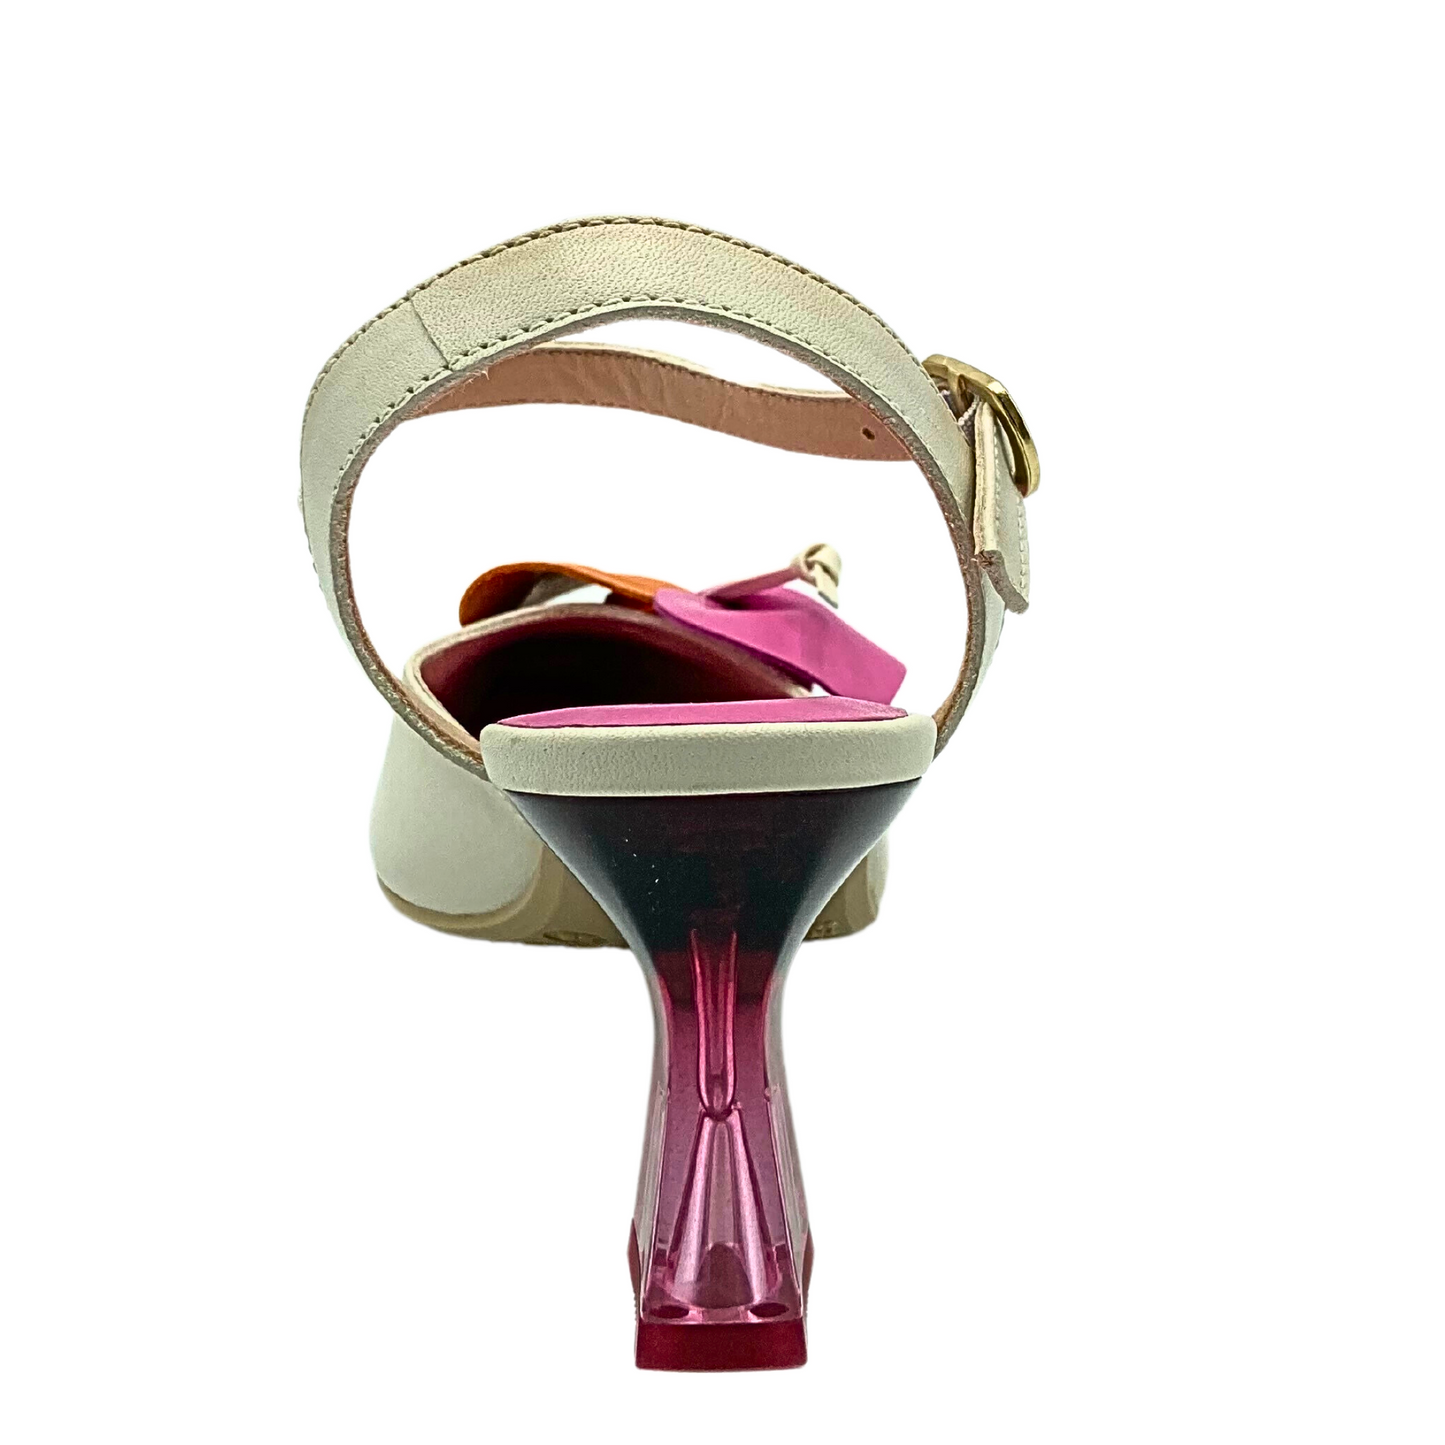 Rear view of dressy sandal with fun lucite heel